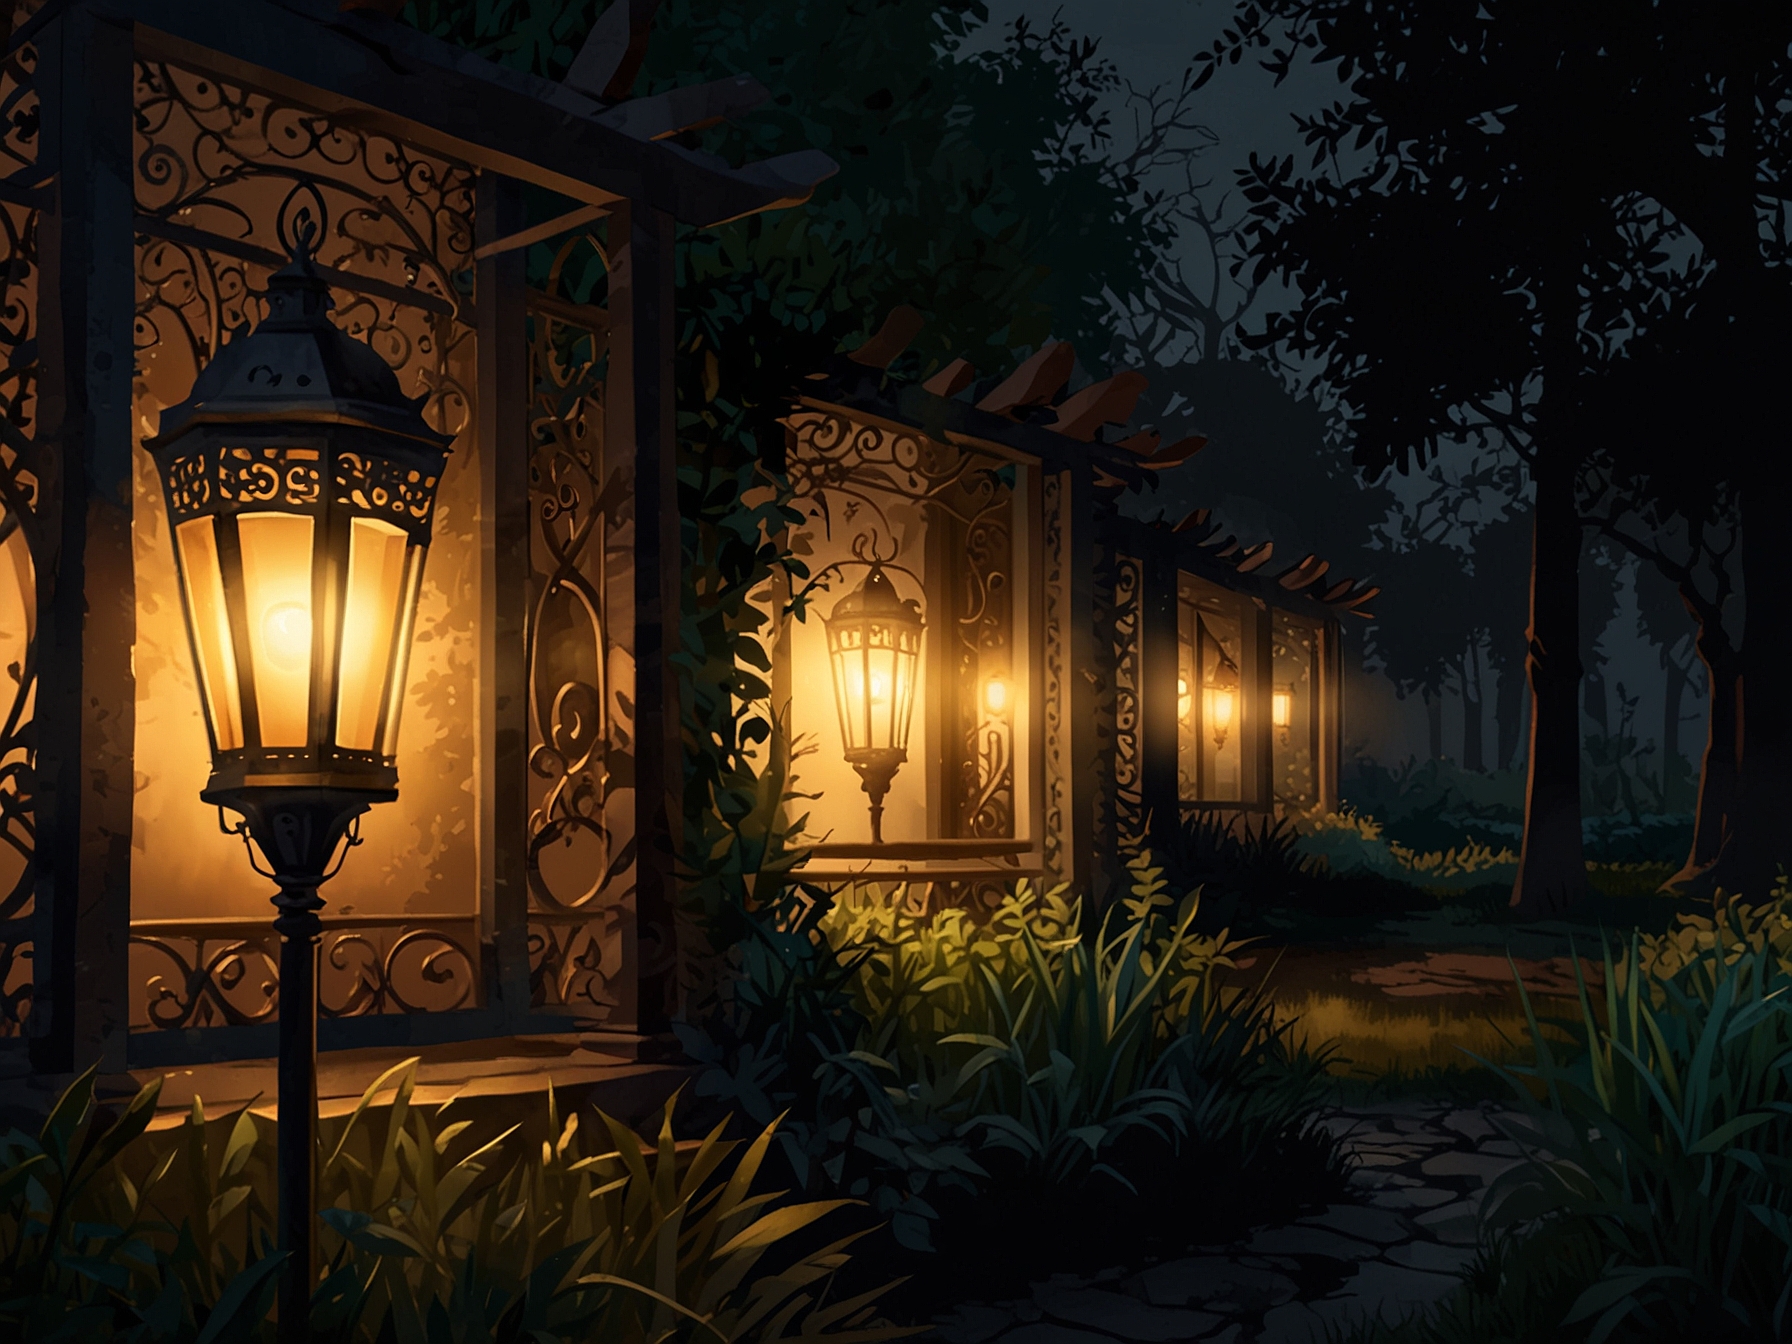 A beautifully designed garden lantern casting enchanting shadows and a warm glow, setting a magical ambiance in a lush garden during the evening hours.